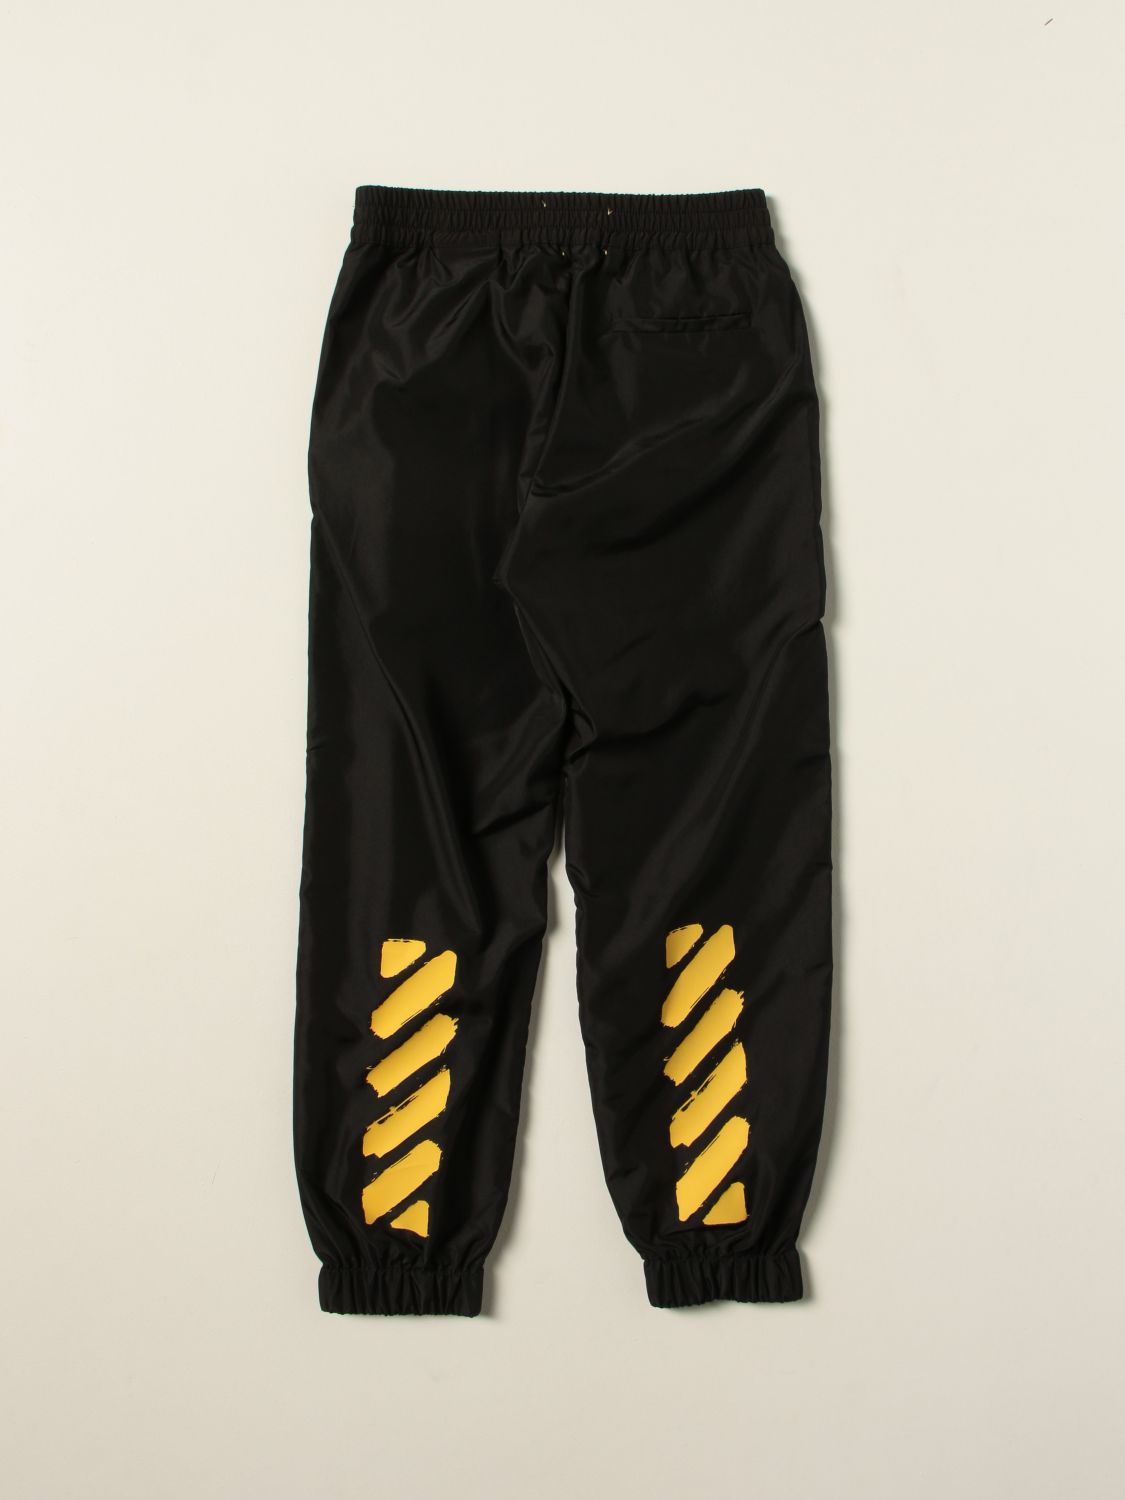 OFF WHITE: Pants kids | Pants Off Kids Black | Pants Off White GIGLIO.COM